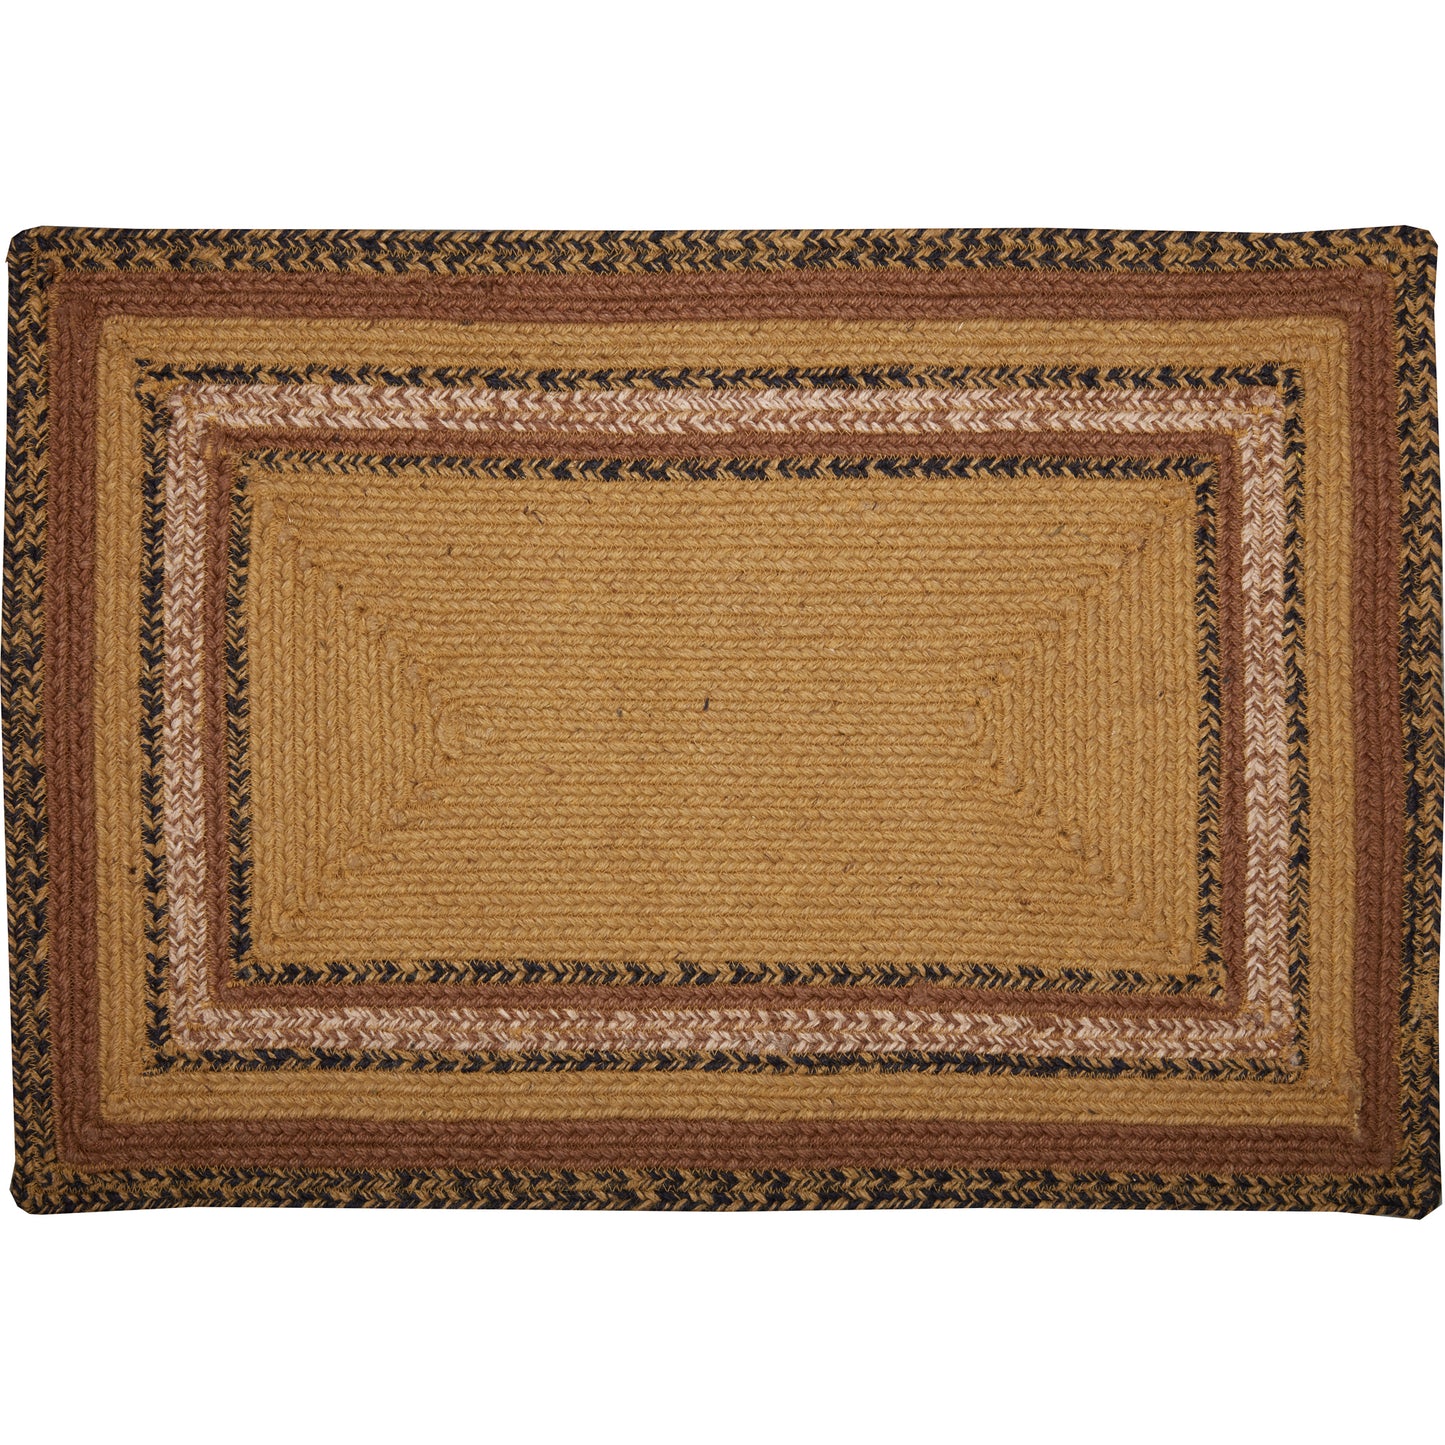 69793-Kettle-Grove-Jute-Rug-Rect-Stencil-Welcome-w-Pad-20x30-image-2